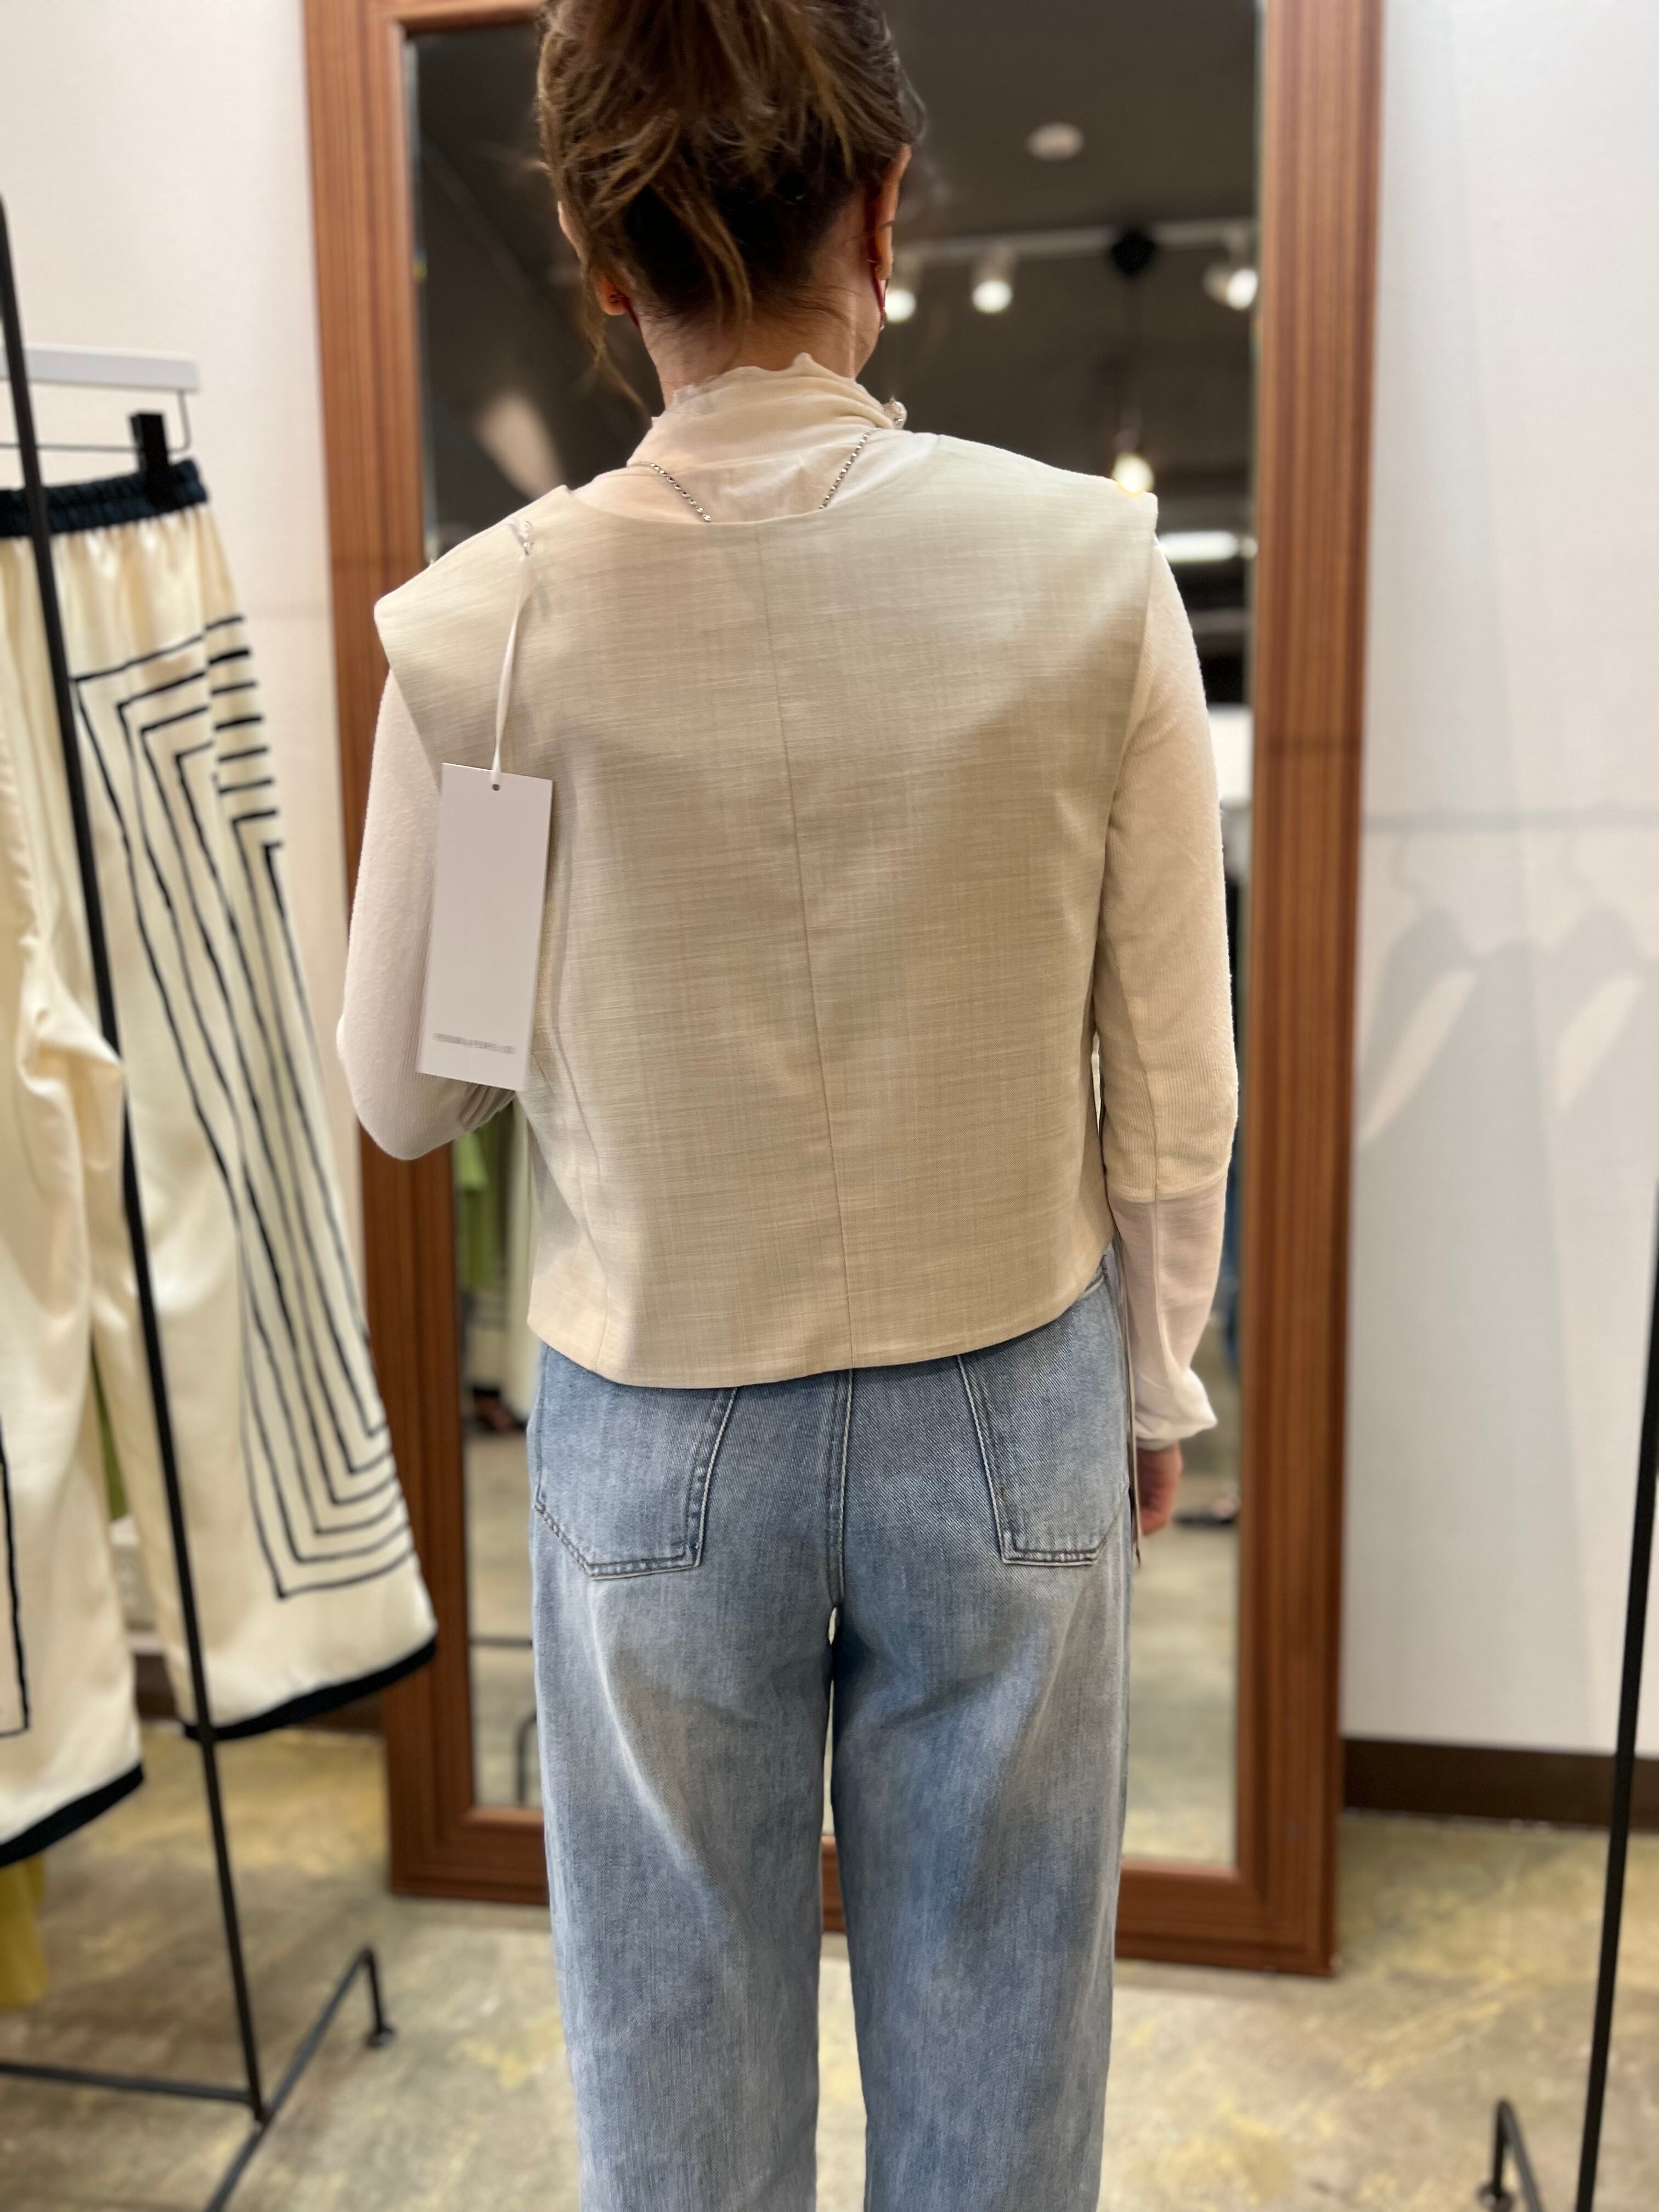 【CHIGNON】サイドオープンビスチェ | select clothes Miel powered by BASE